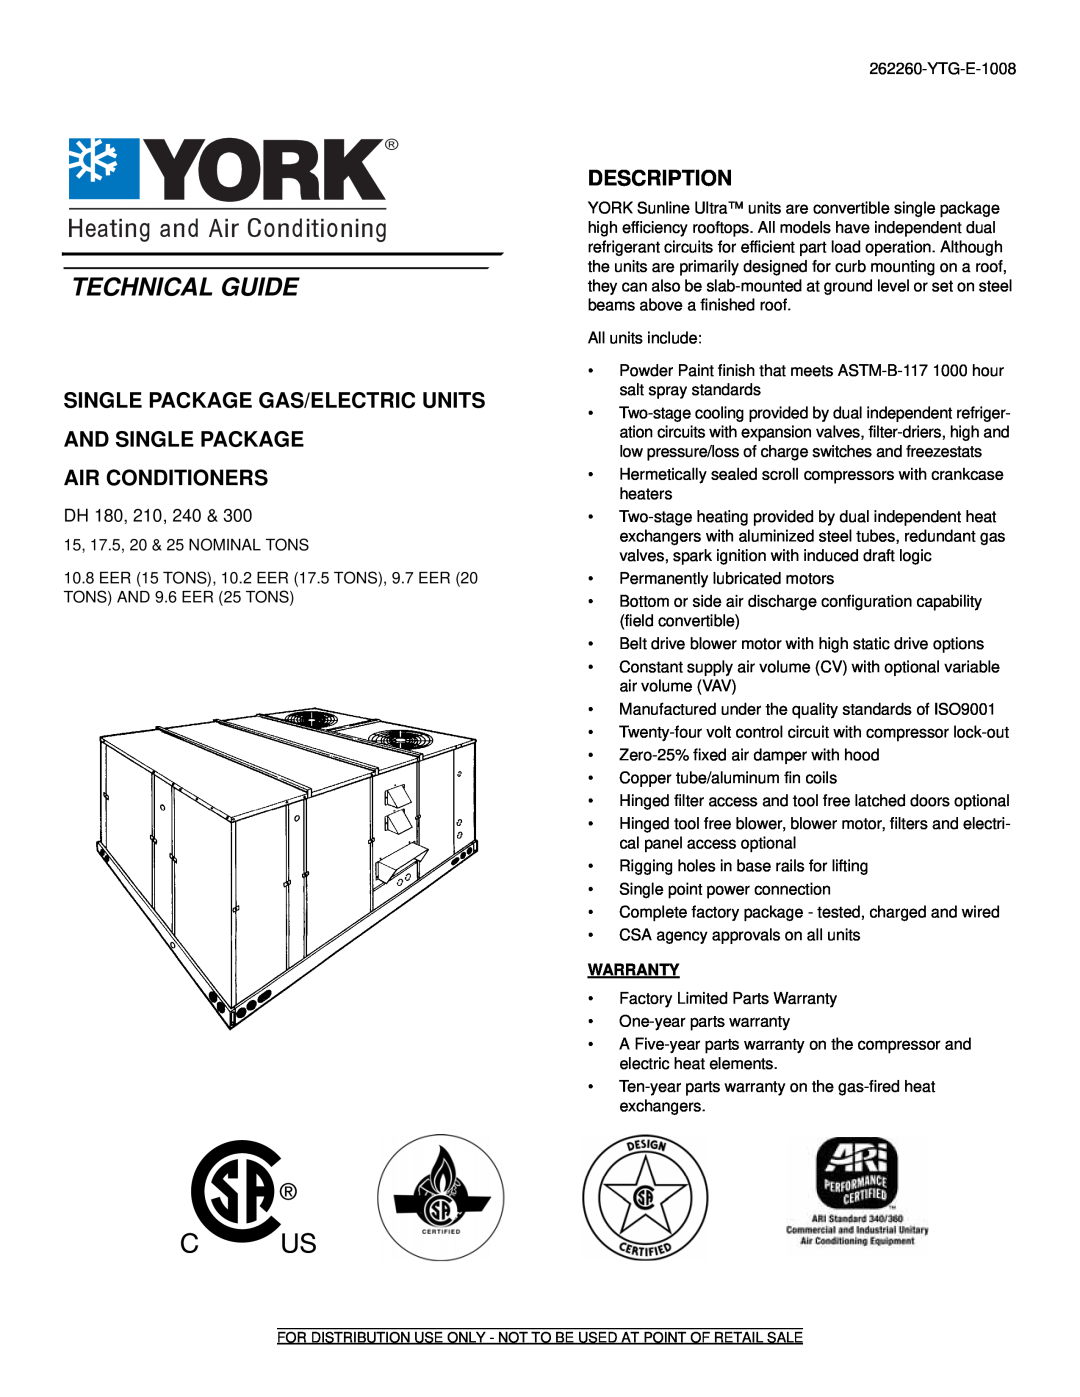 York warranty Single Package Gas/Electric Units, And Single Package Air Conditioners, Description, DH 180, 210, 240 